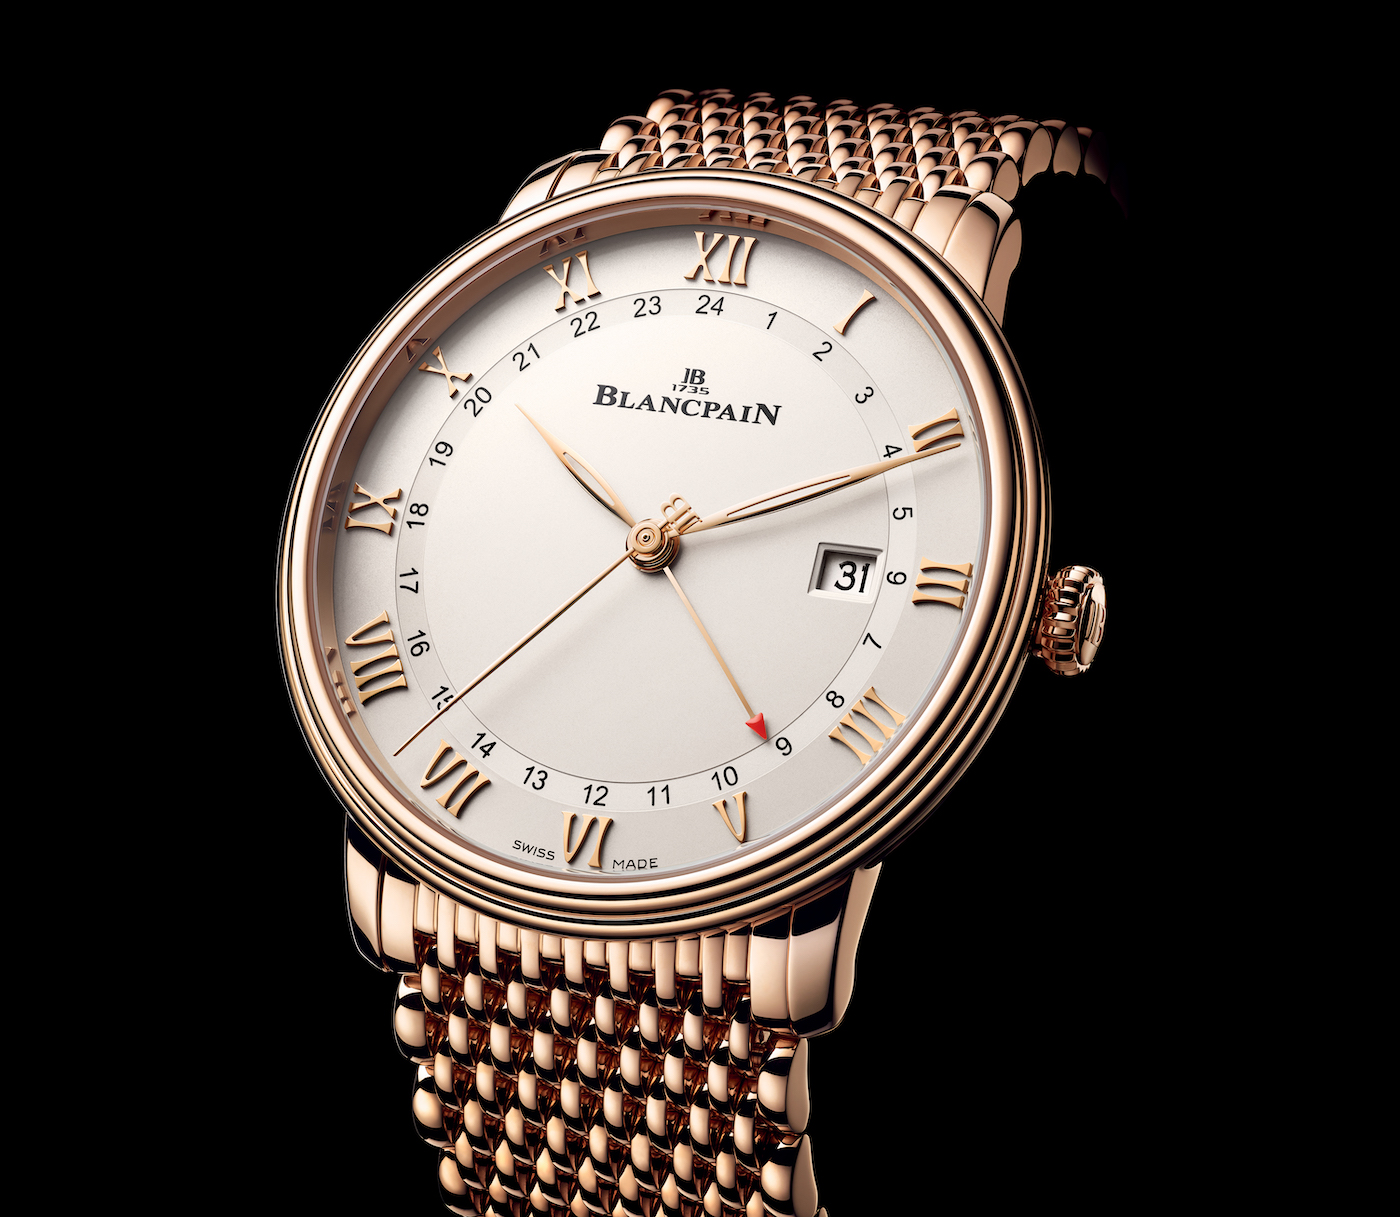 Blancpain Villeret GMT Date Replica Watch Offers Multiple Functions In A Pared-Back Package